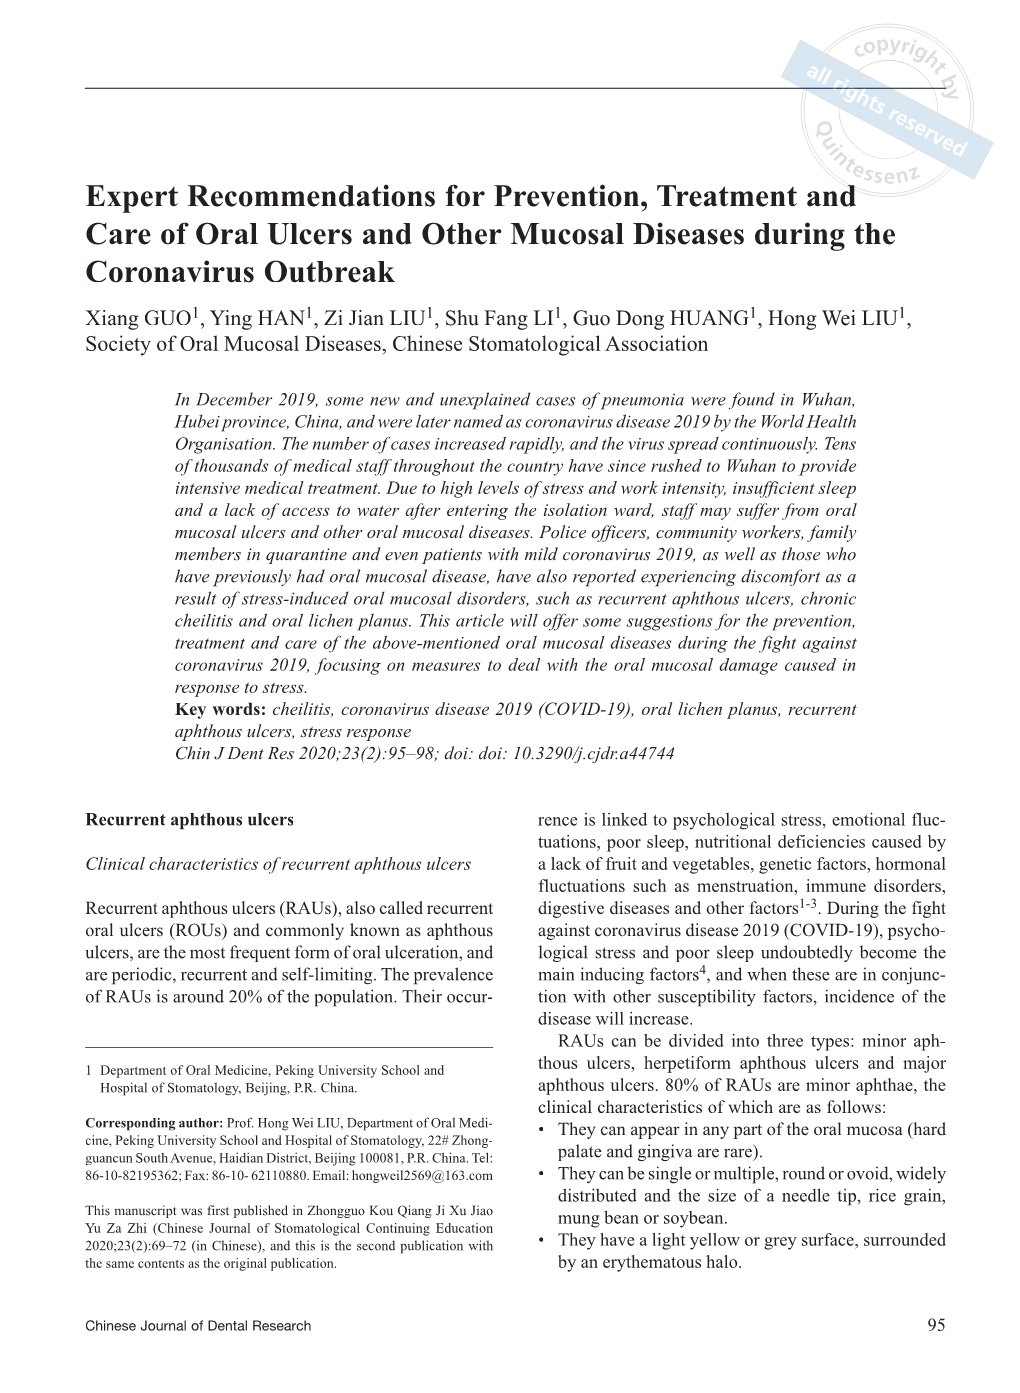 Expert Recommendations for Prevention, Treatment and Care of Oral Ulcers and Other Mucosal Diseases During the Coronavirus Outbreak